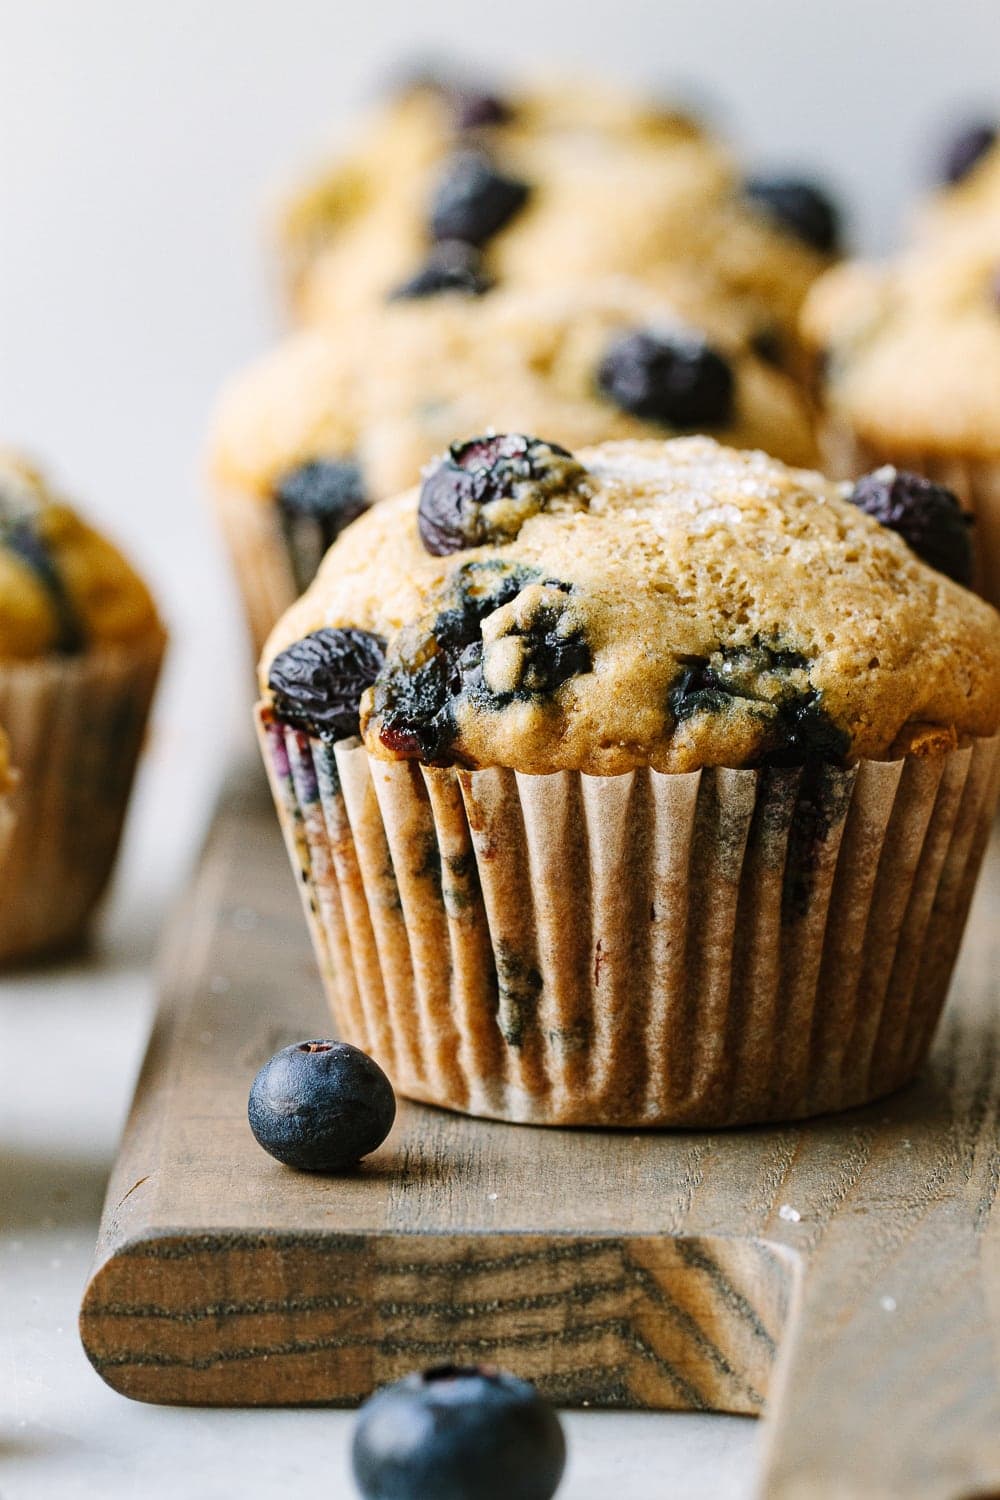 Vegan Blueberry Muffins (Healthy + Easy) - The Simple Veganista